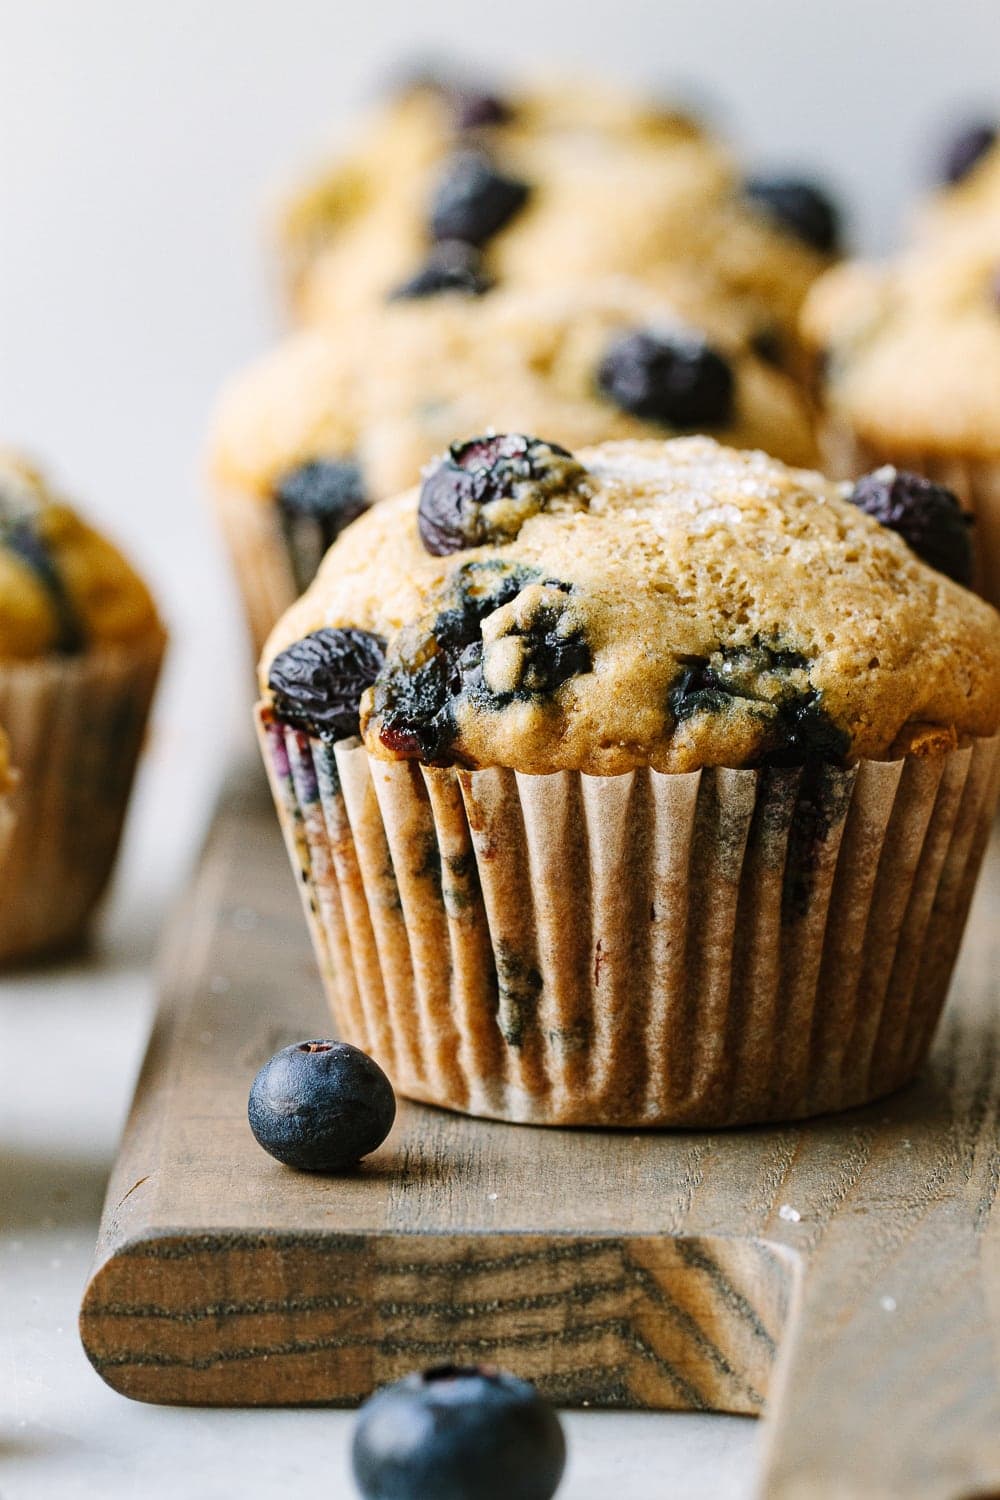 Vegan Blueberry Muffins (Healthy + Easy) - The Simple Veganista